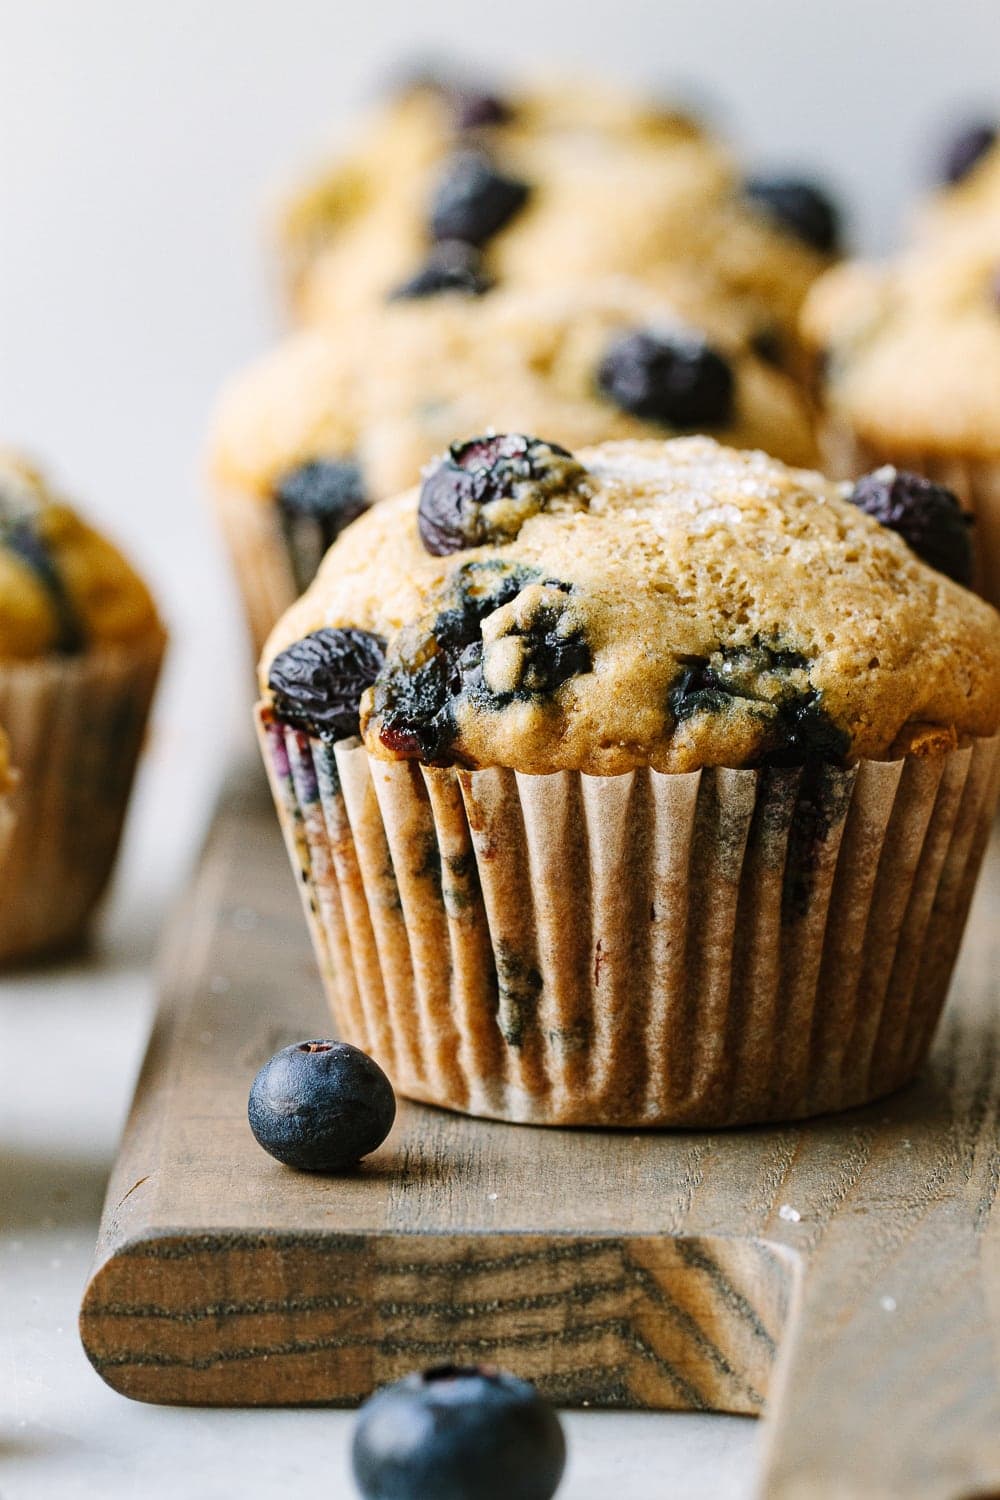 Vegan Blueberry Muffins (Healthy + Easy) - The Simple Veganista